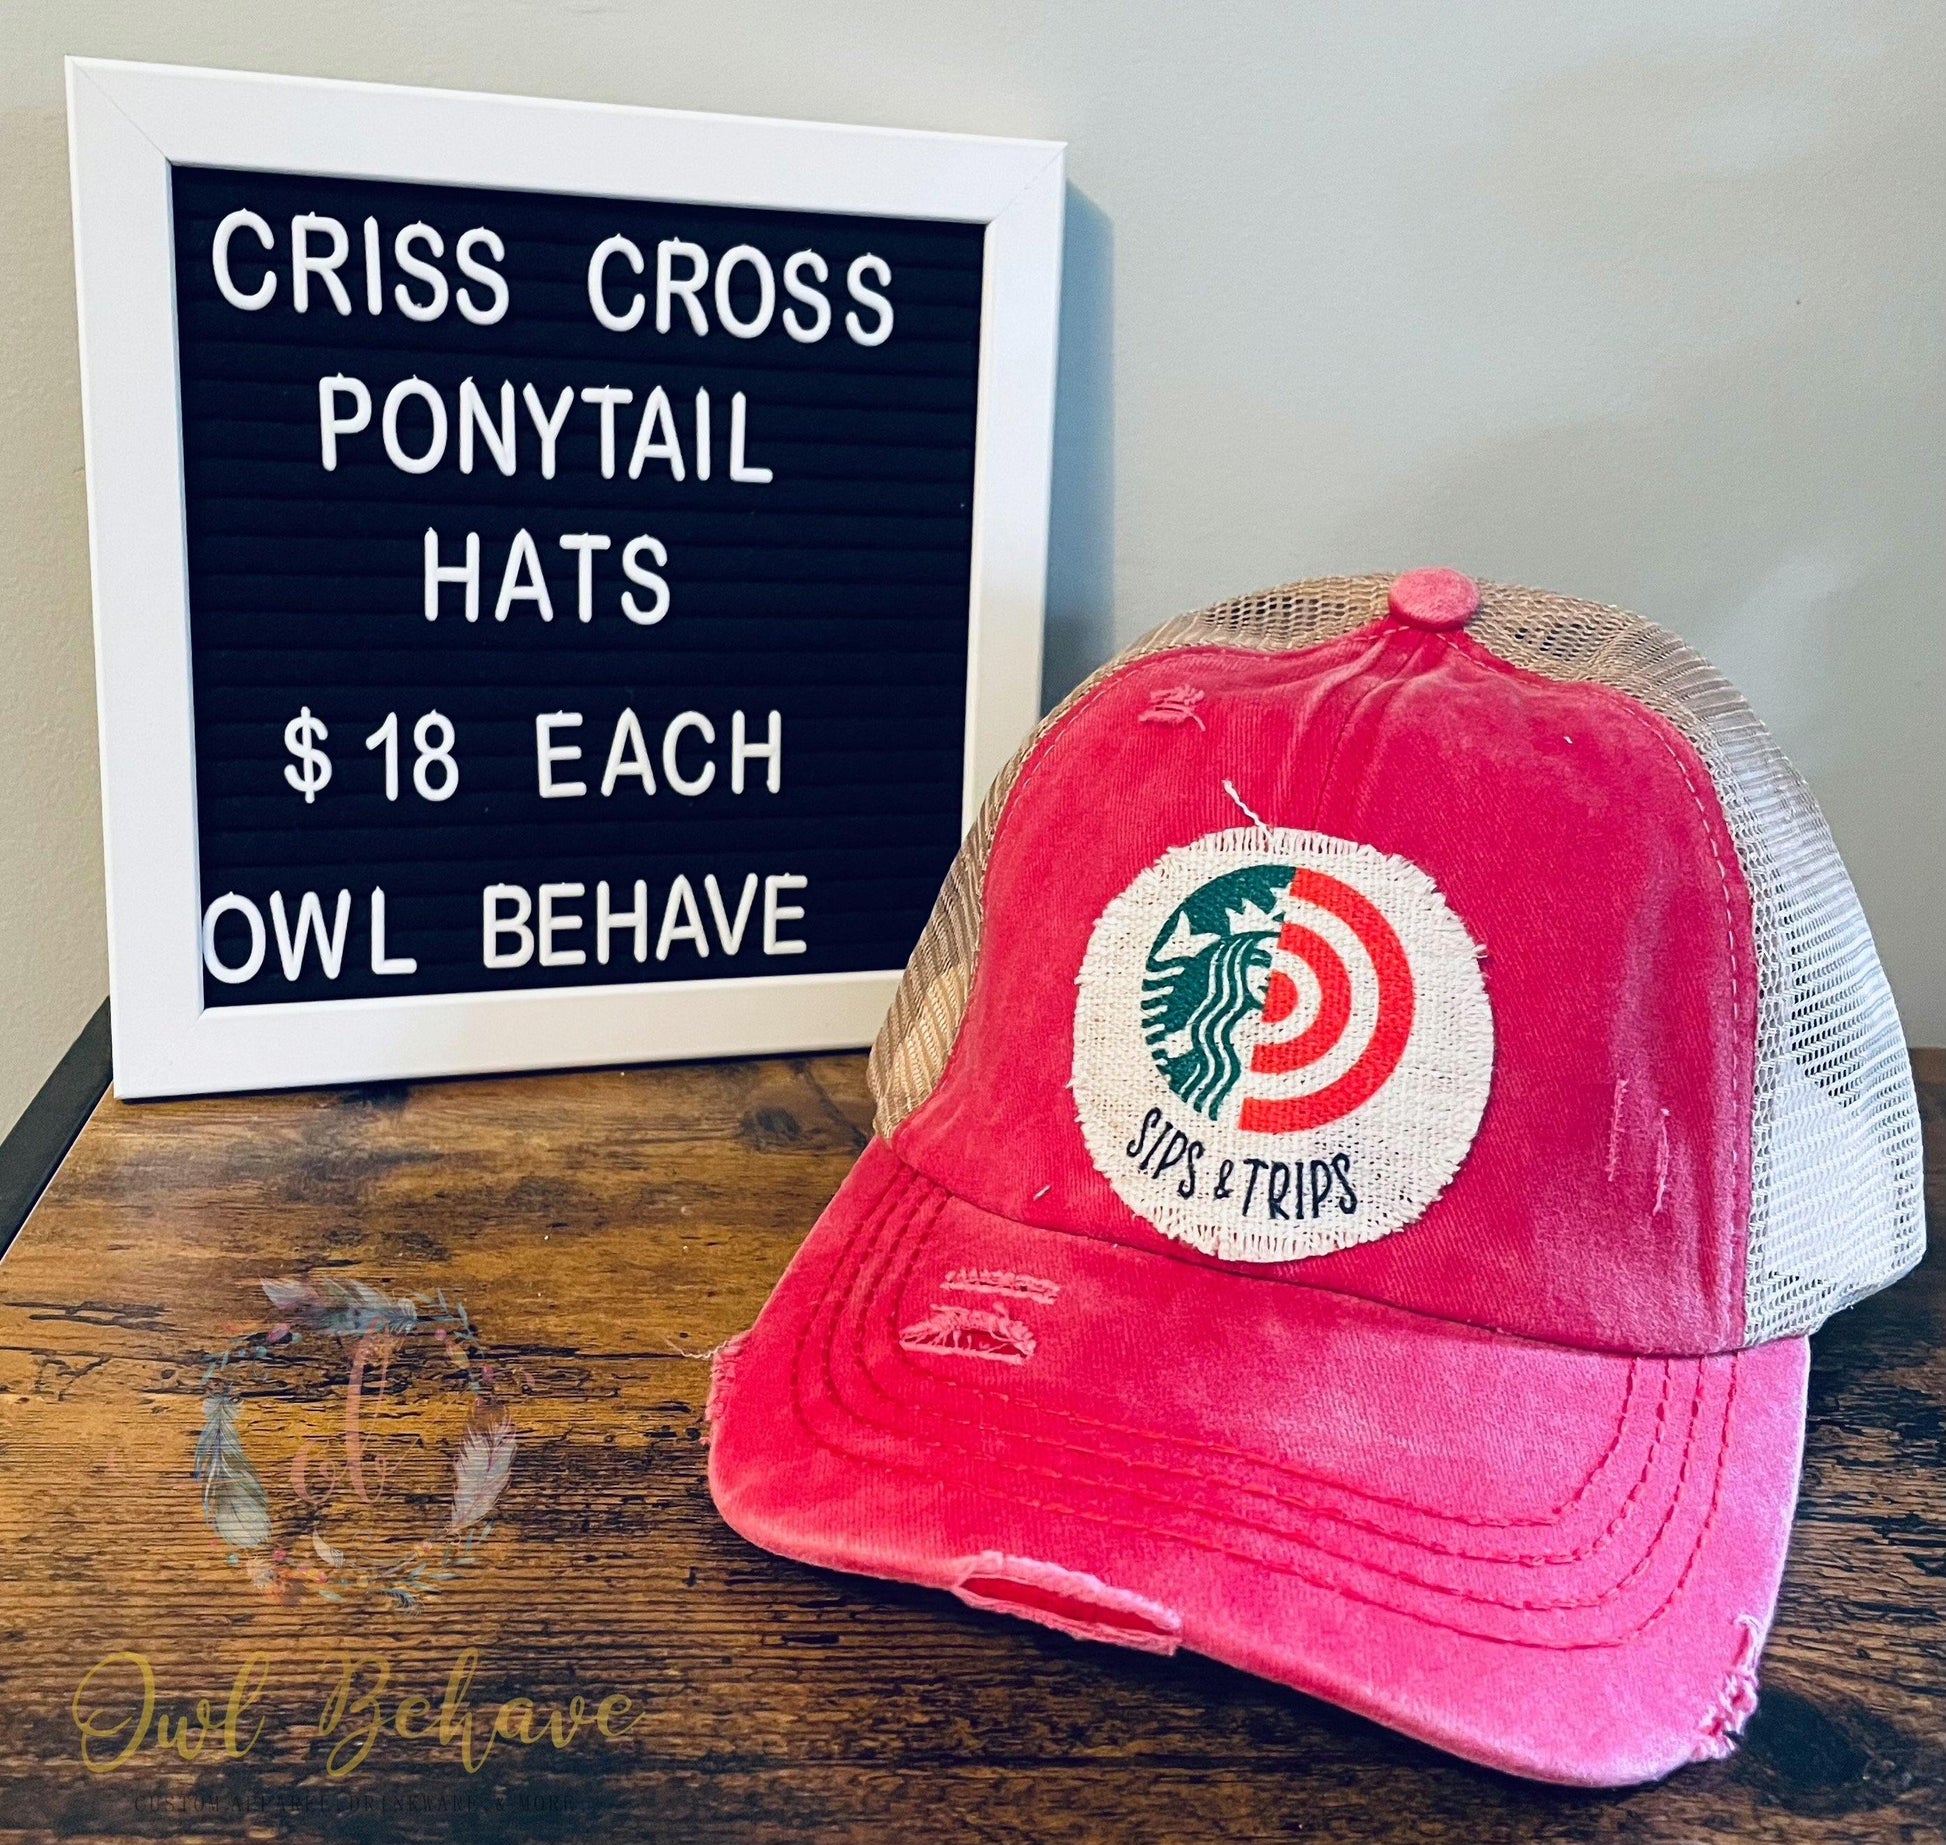 Sips & Trips Criss Cross Ponytail Hat - OwlBehave 